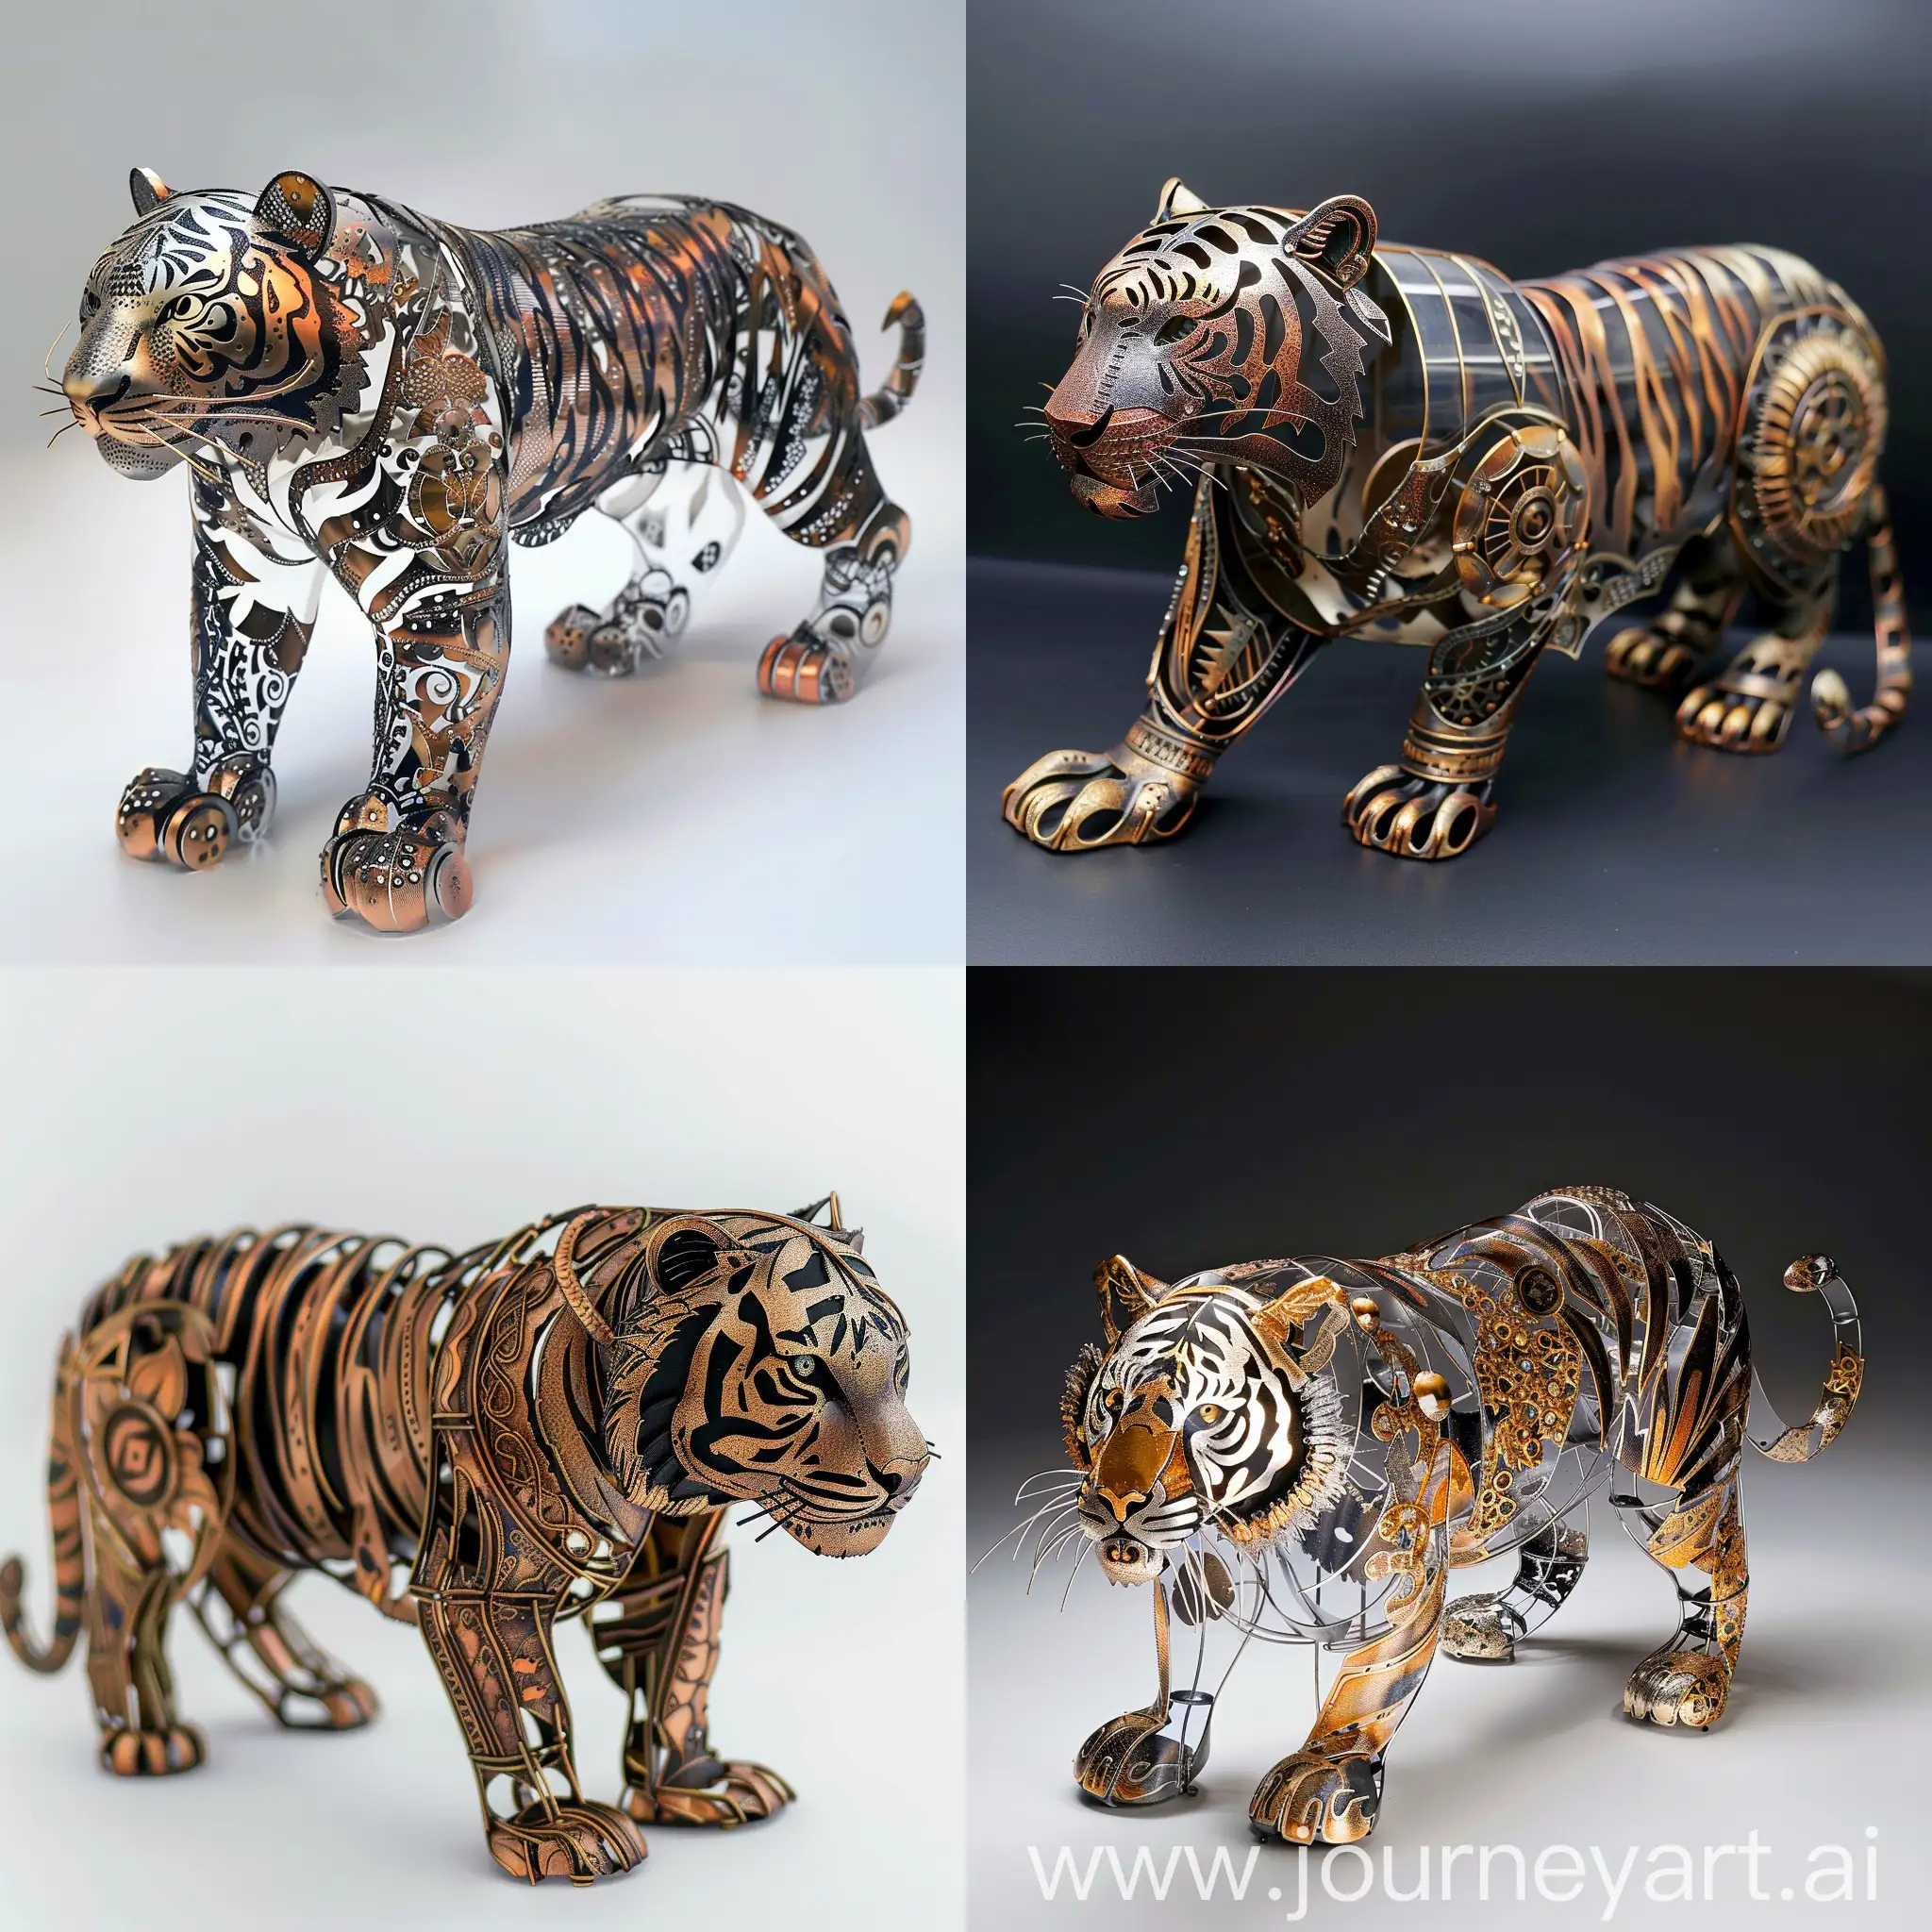 Artisan-Crafting-Metal-Tiger-Ornament-with-Intricate-Patterns